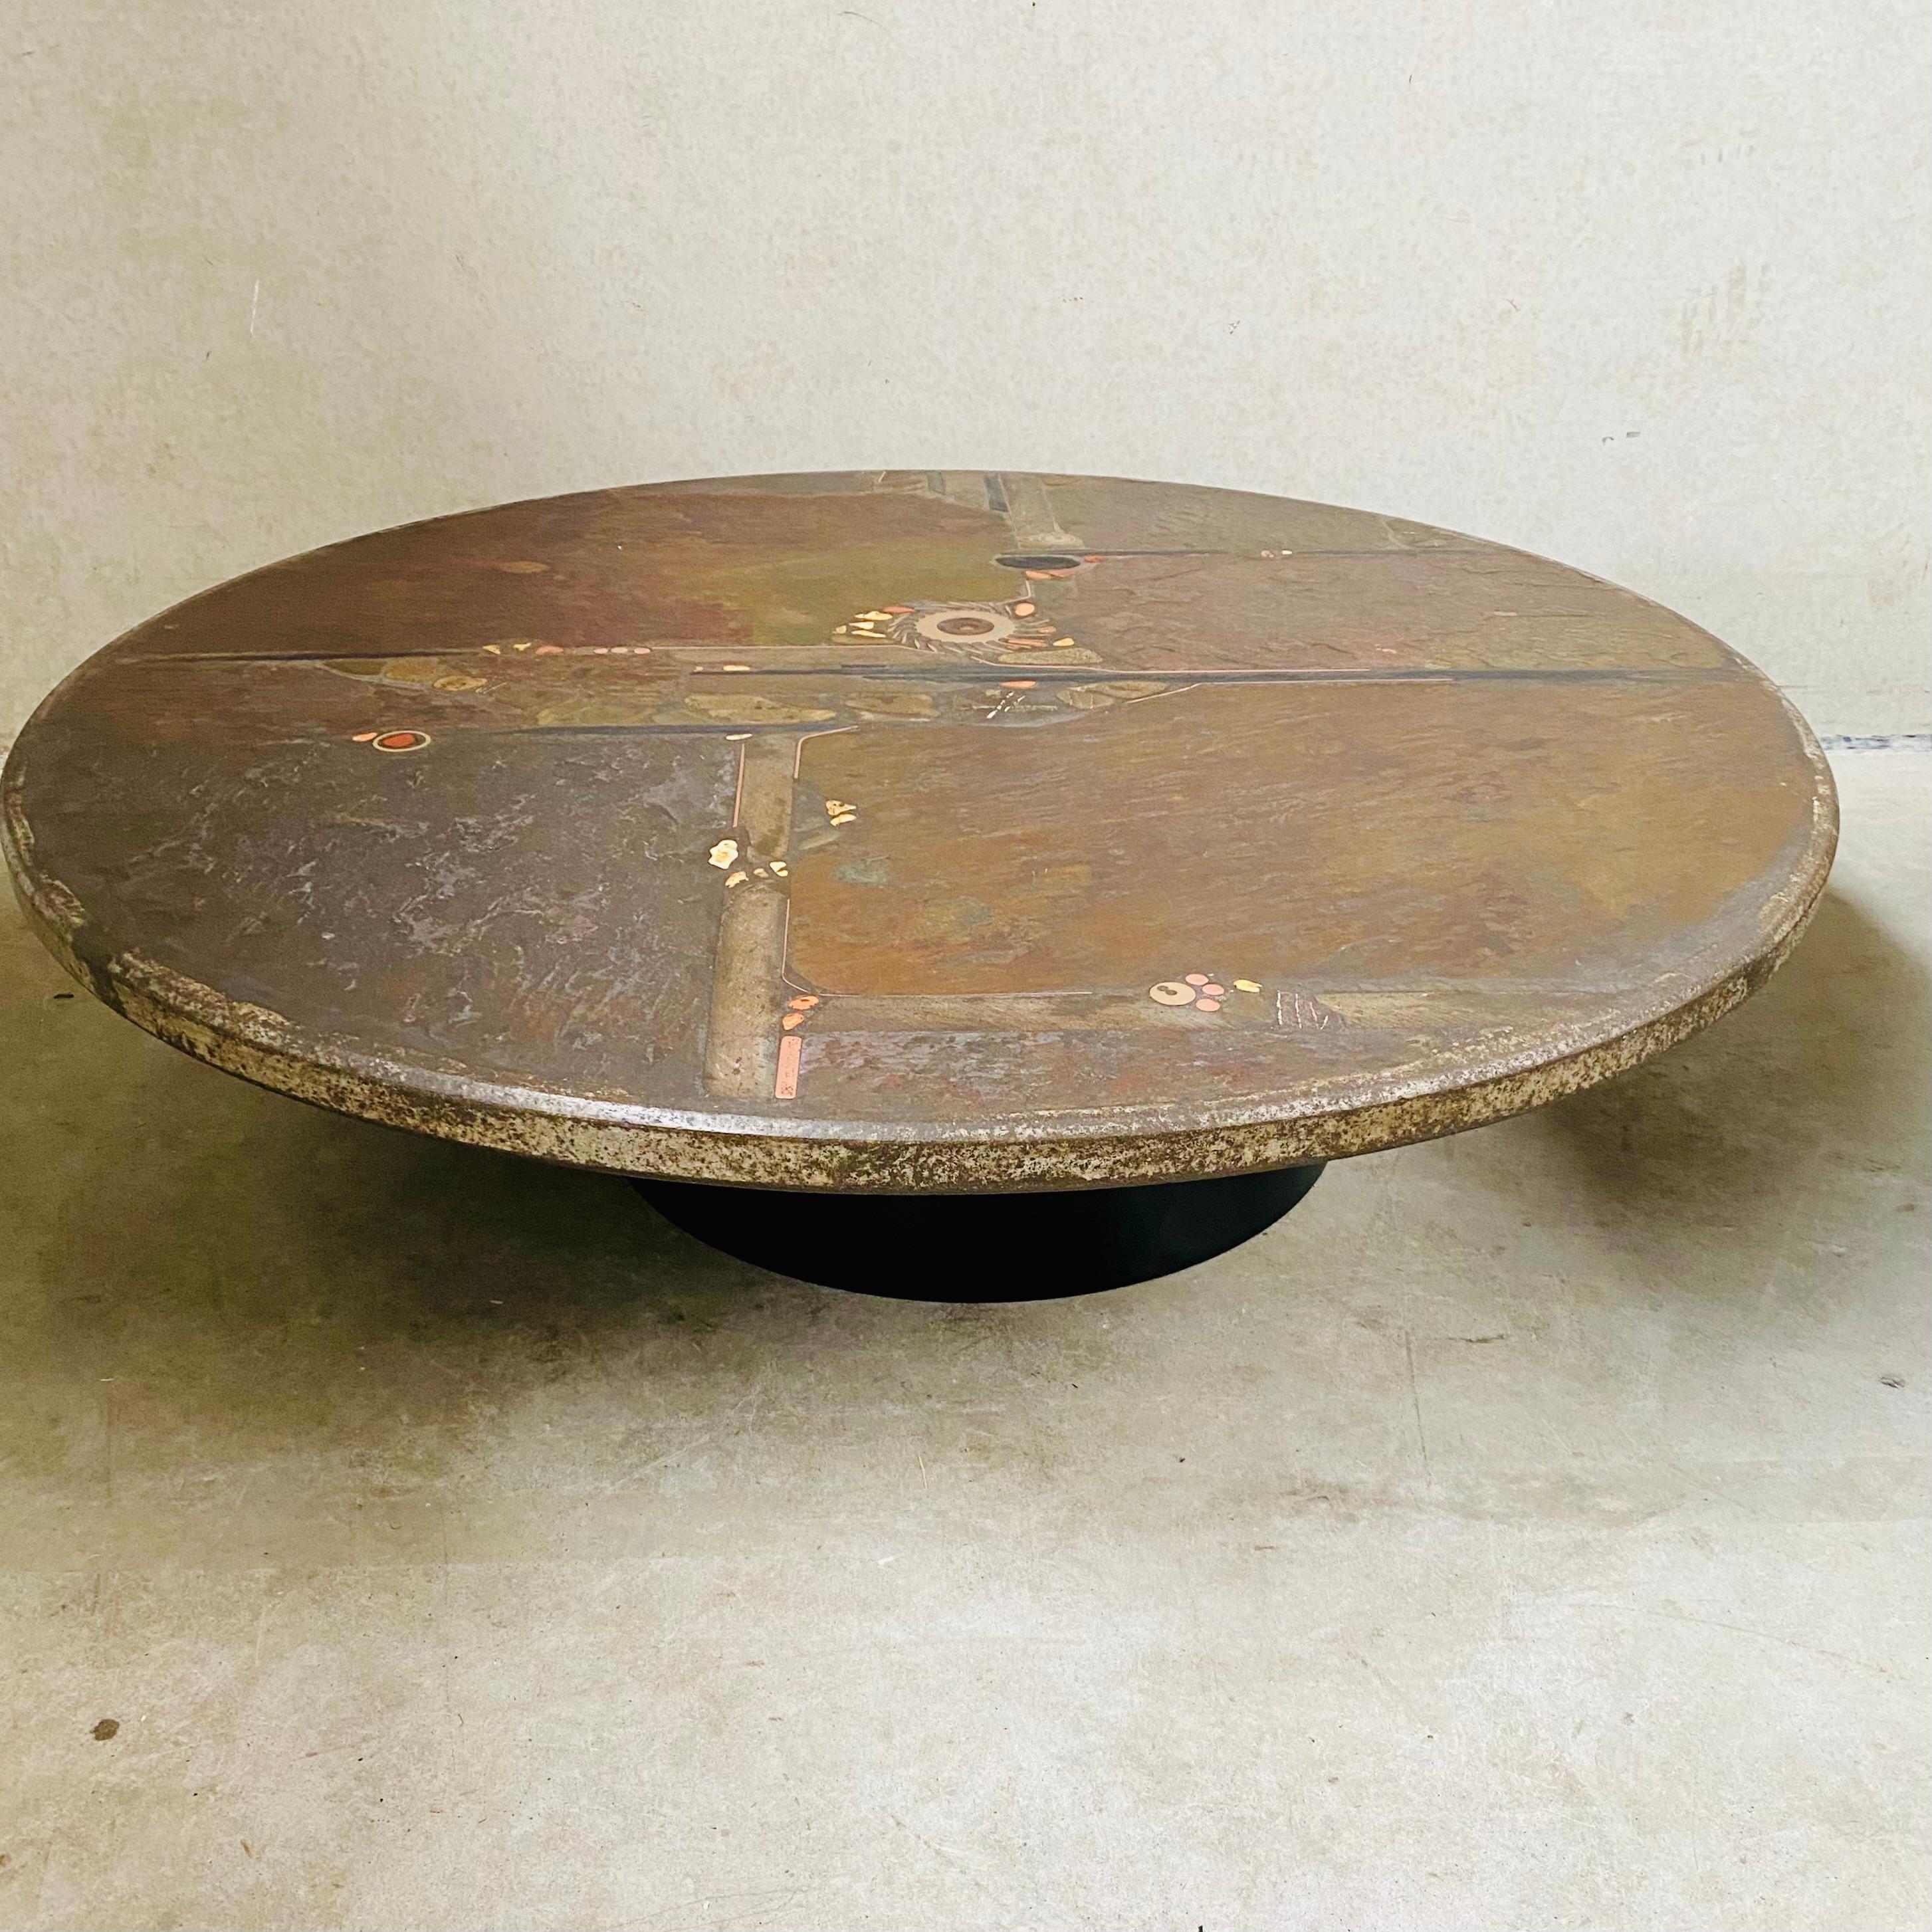 Metal Brutalist Art Stone Round Coffee Table by Sculptor Paul Kingma Netherlands, 1985 For Sale